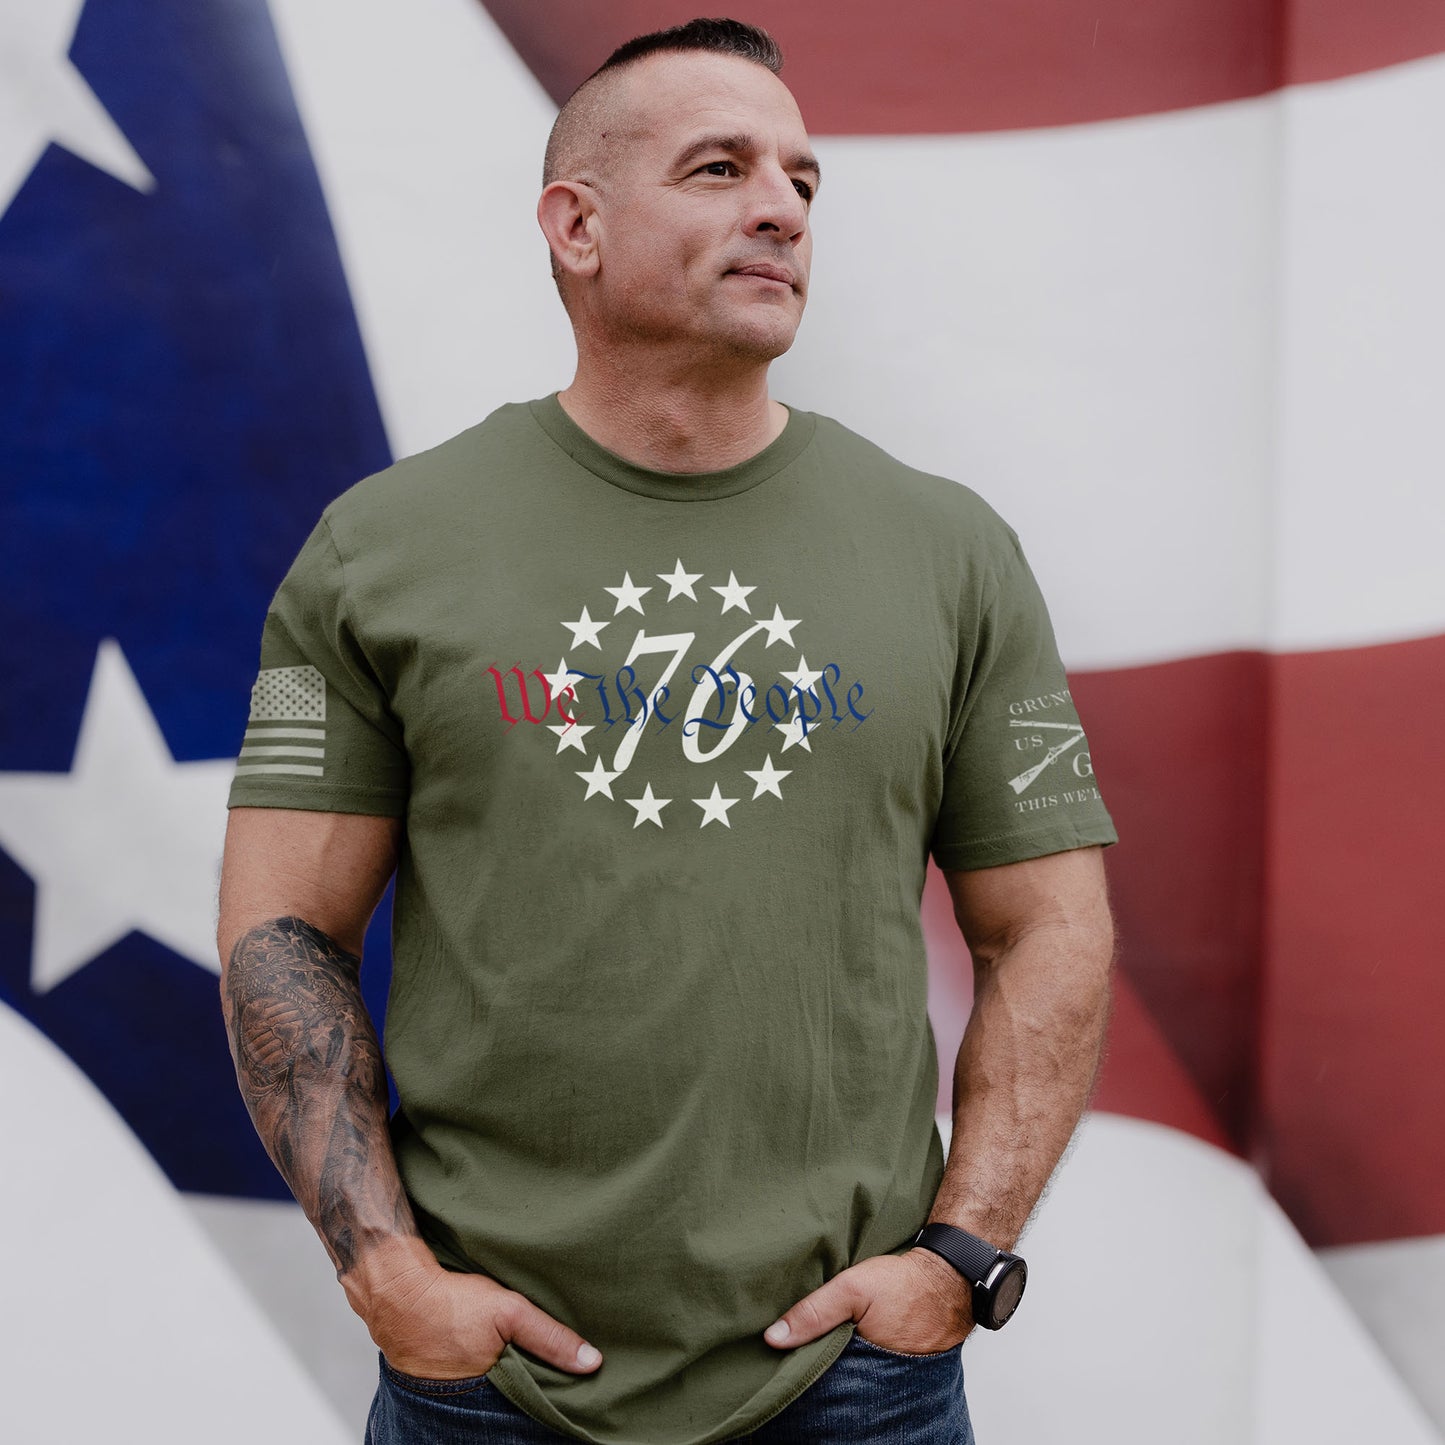 Patriotic Shirt - We the People in Military Green 